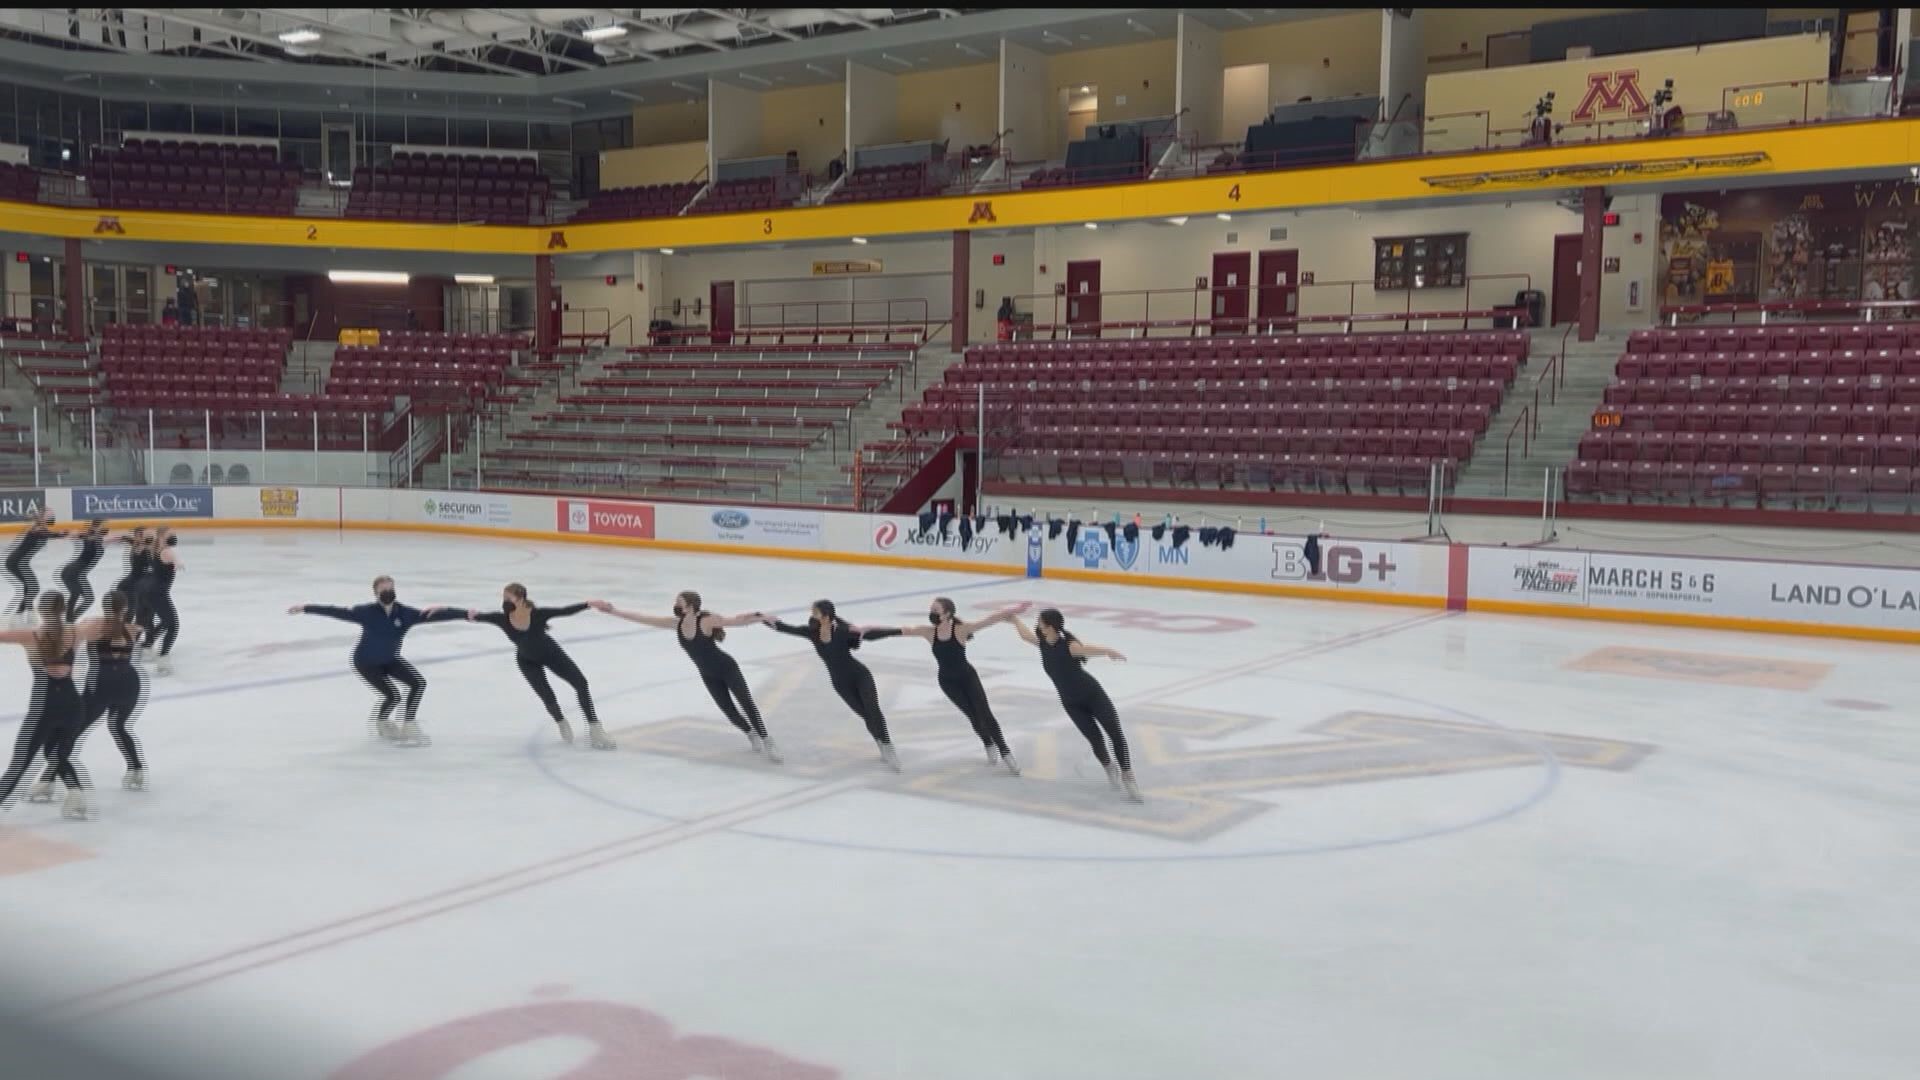 Alana Christie has her most senior skaters, ironically called "Juniors," ready to compete in a synchronized skating competition that features the best in the world.